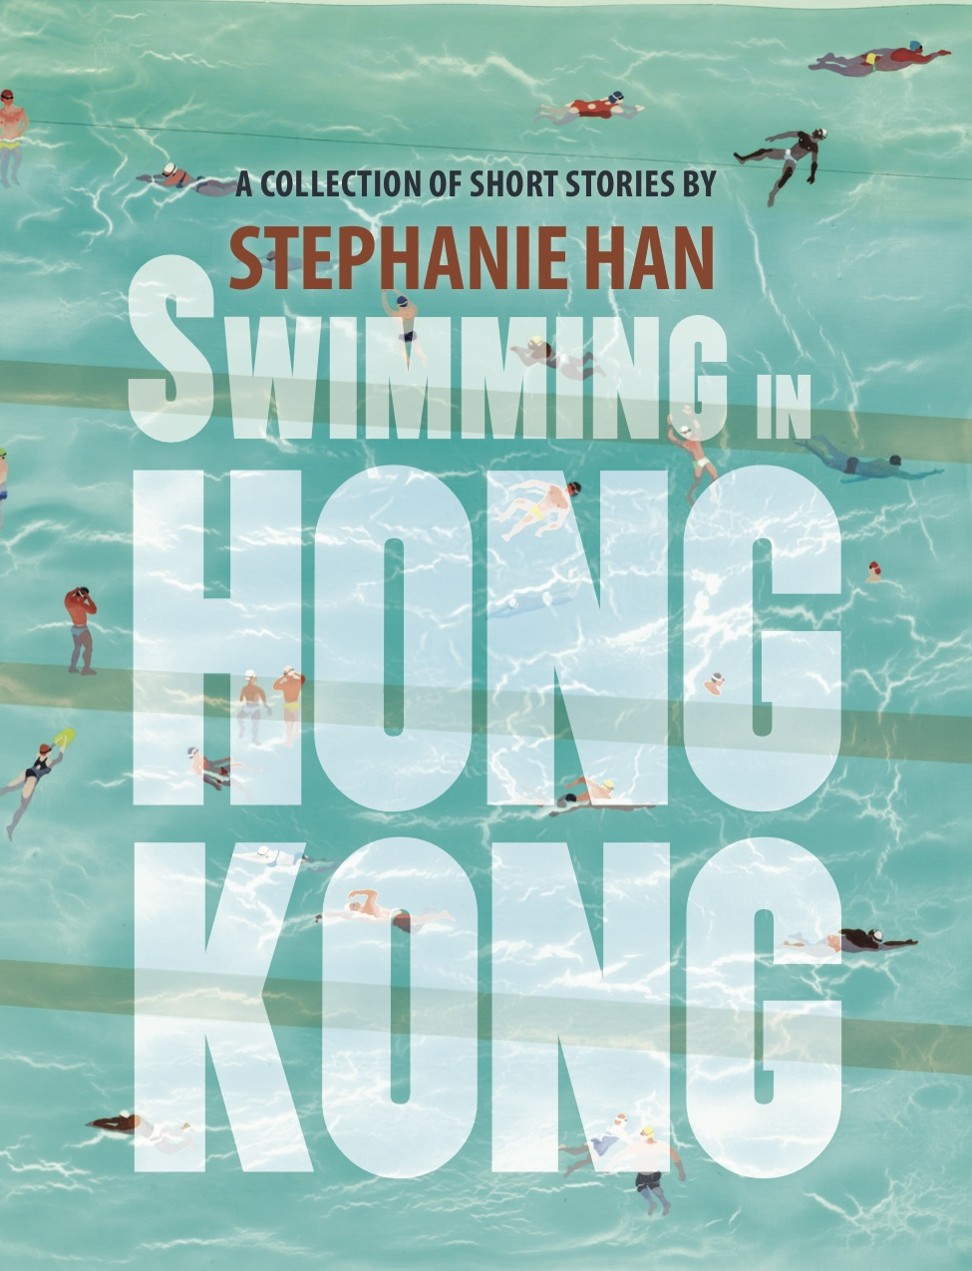 Swimming in Hong Kong will be published in November by Willow Springs Books.